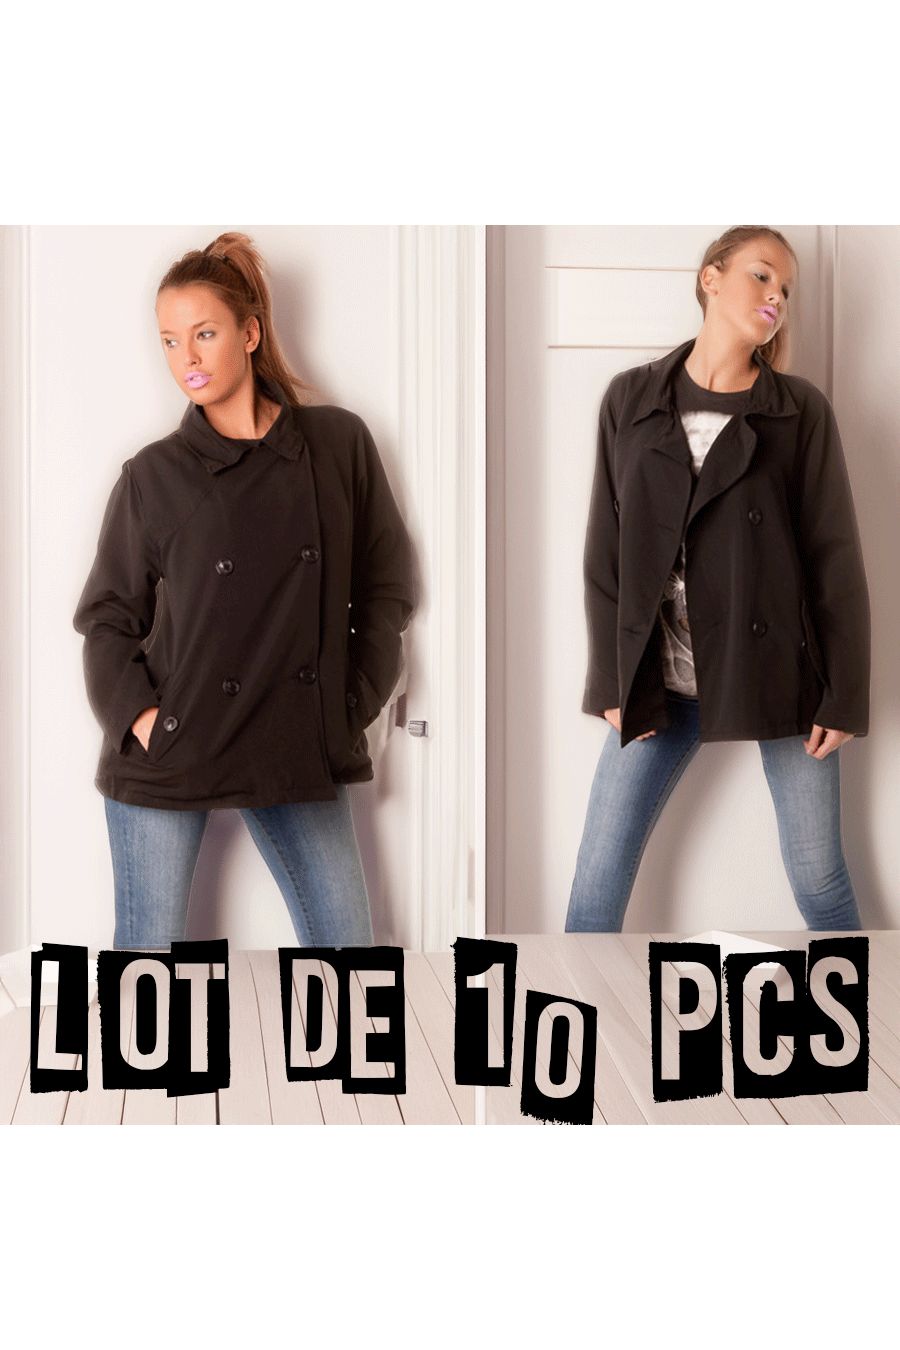 Discover all our collection of women's clothing, loose and large